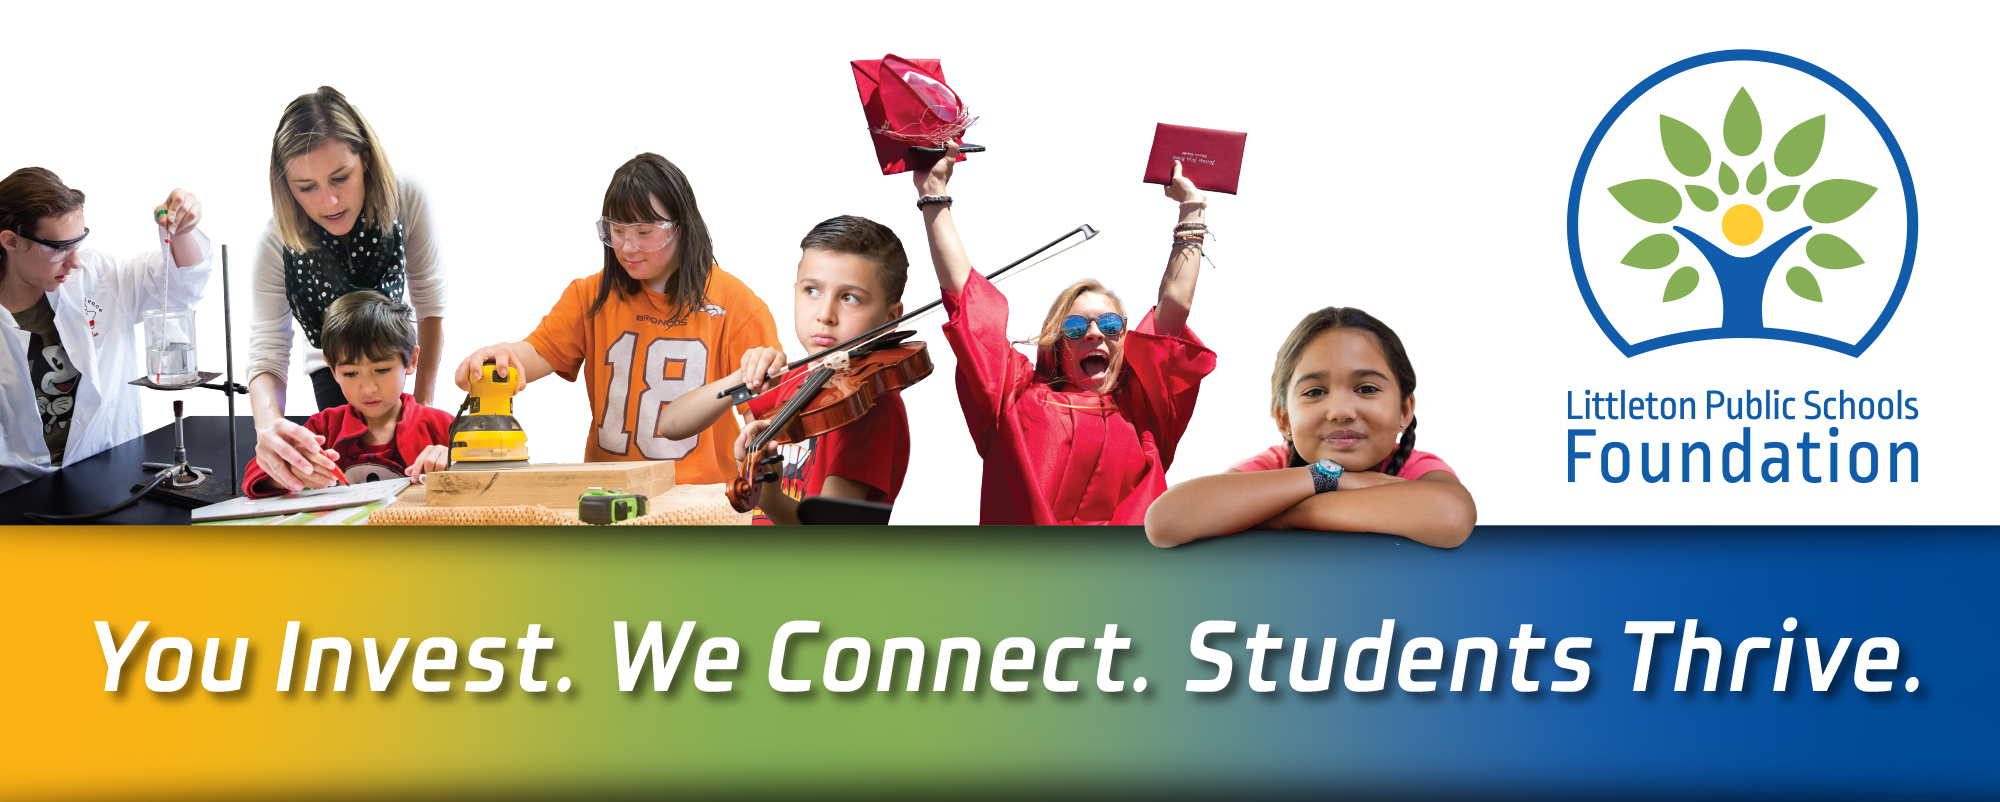 LPSF Banner - You Invest. We Connect. Students Thrive. 